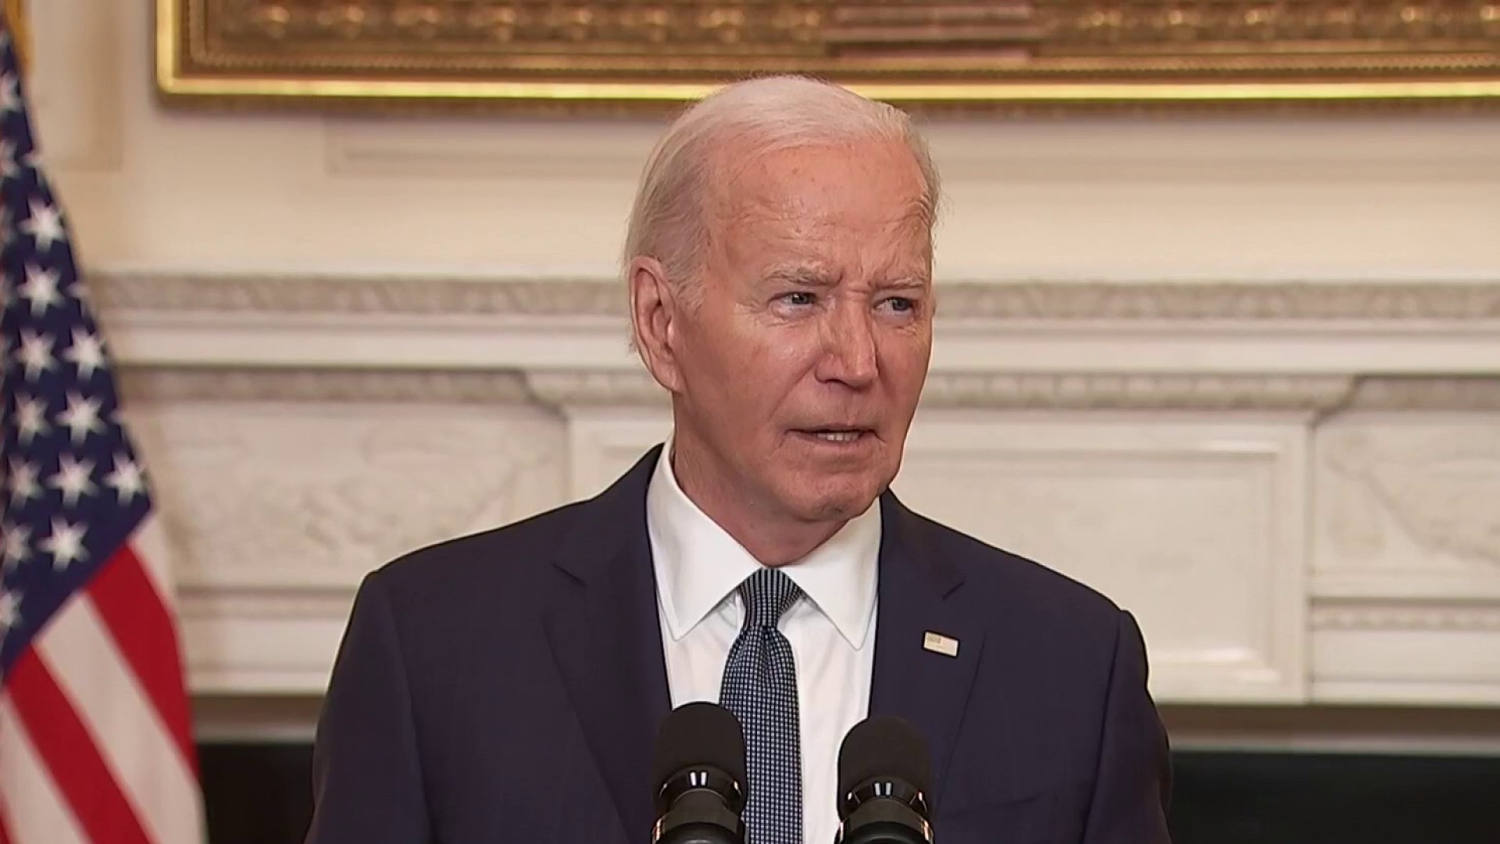 Biden on Trump reaction to guilty verdict: 'Irresponsible' to claim justice system is rigged